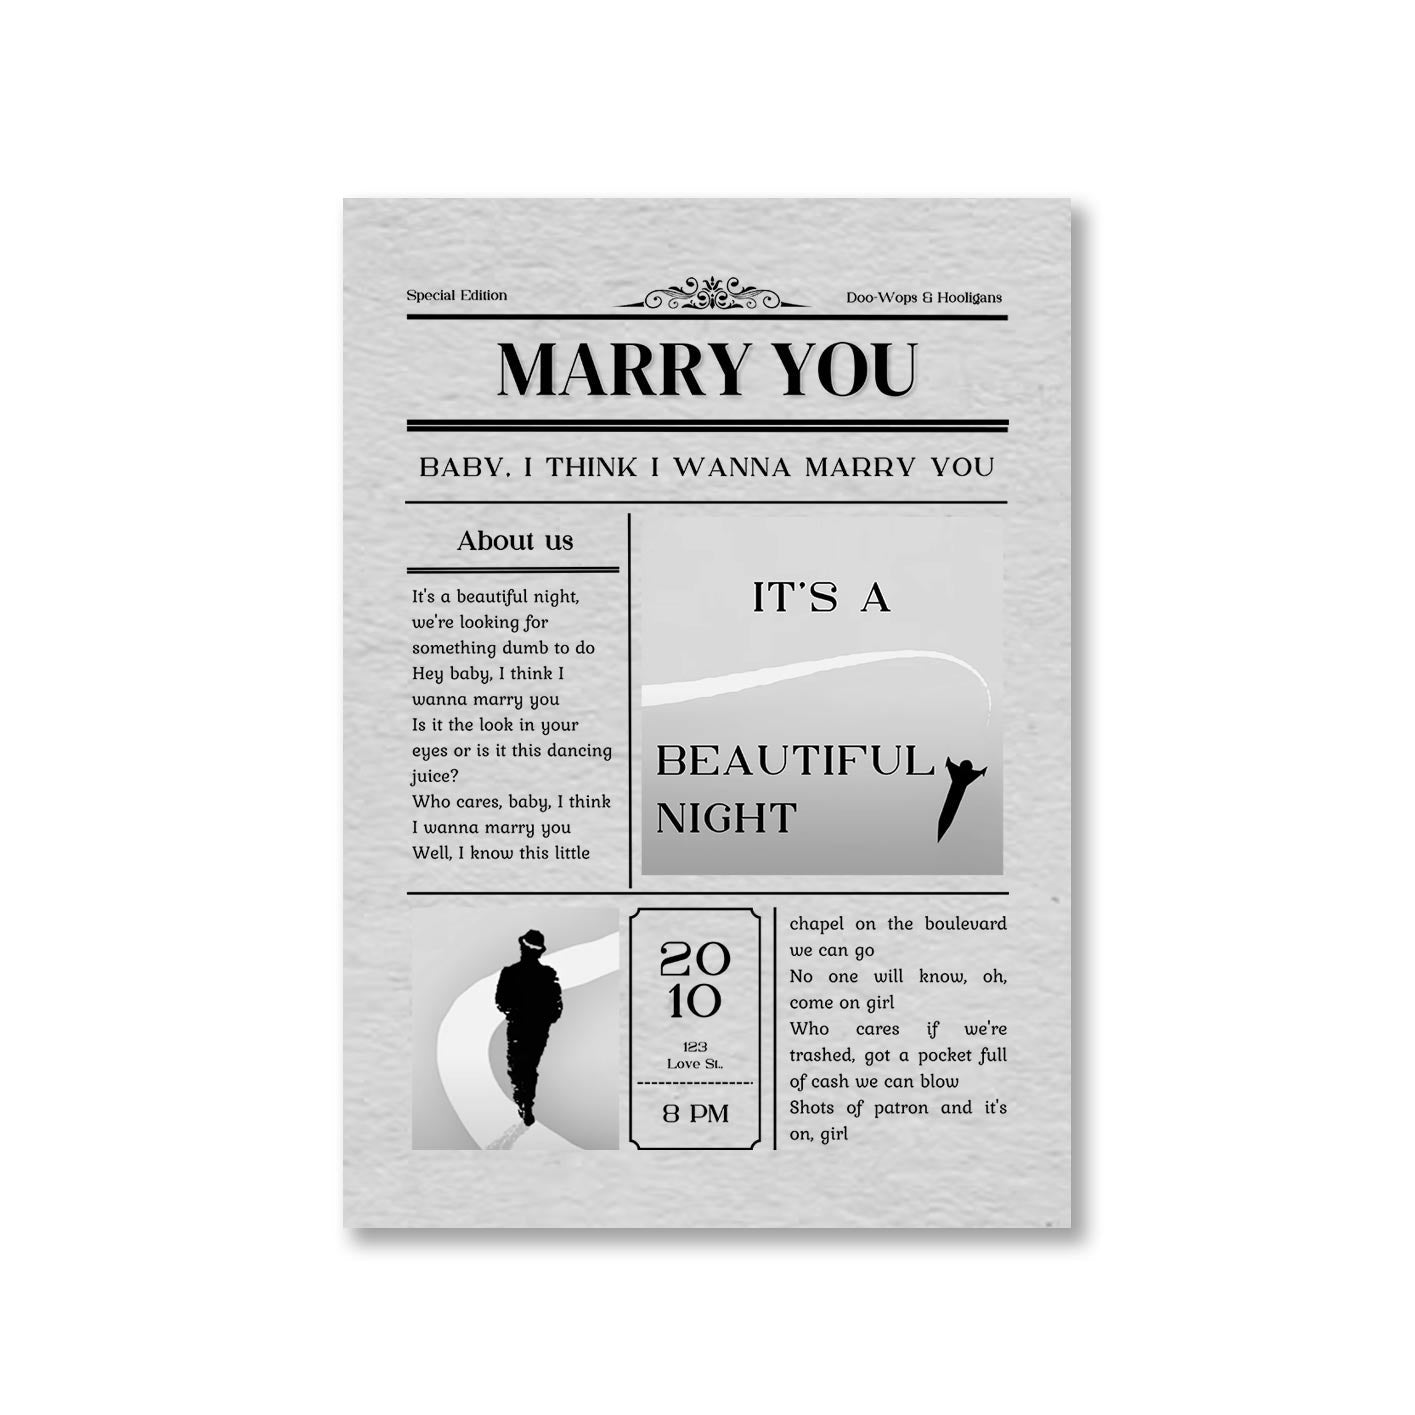 bruno mars marry you poster wall art buy online india the banyan tee tbt a4